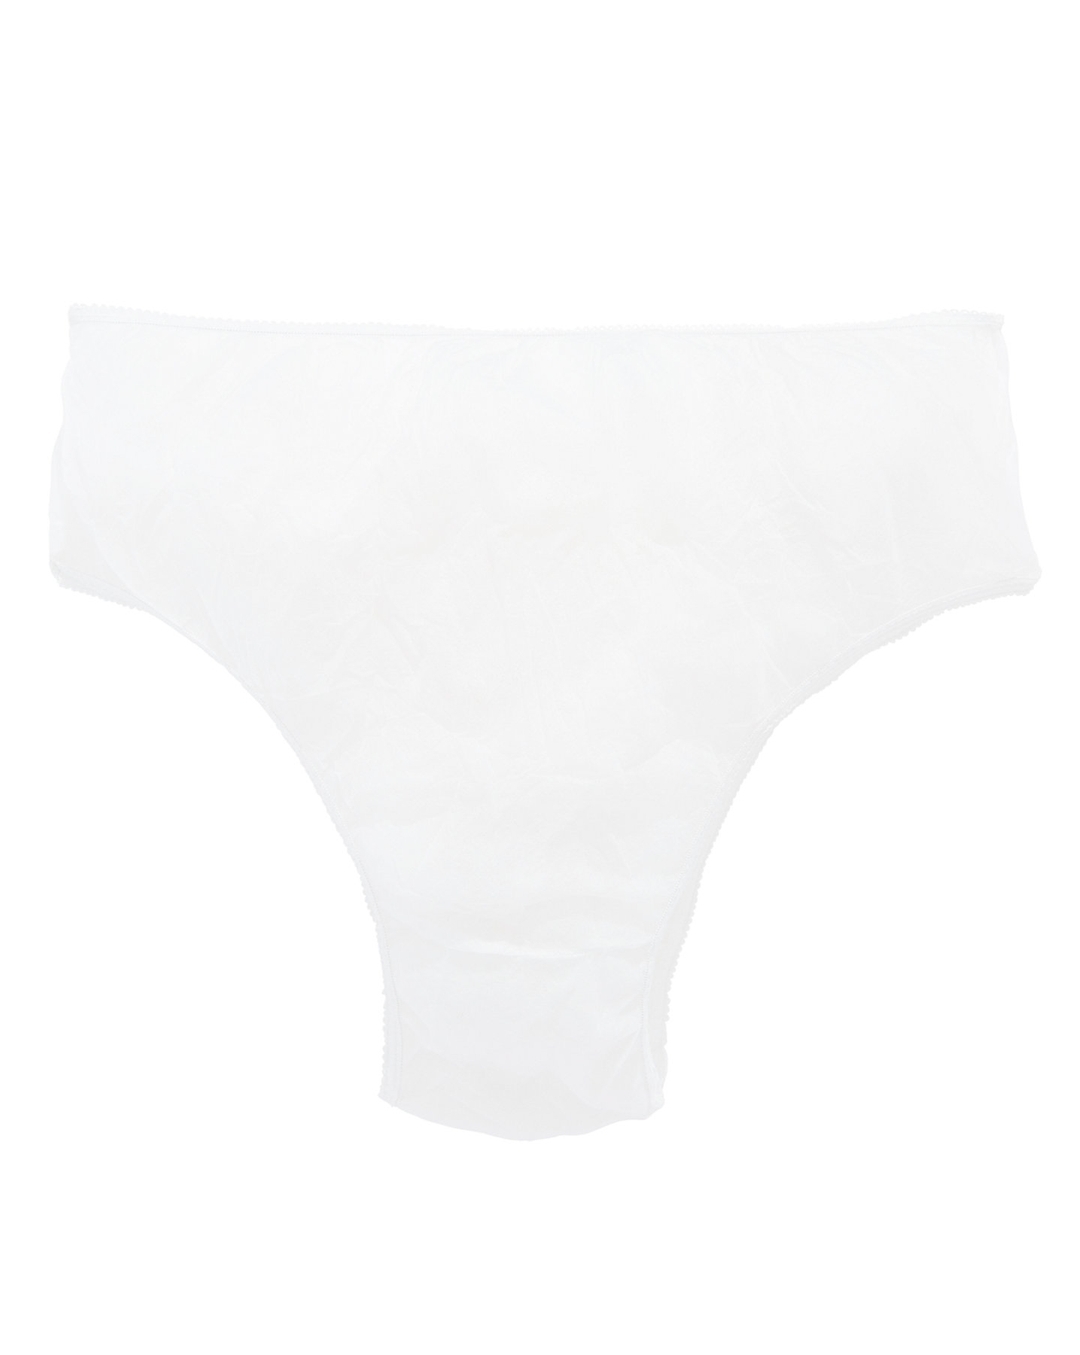 Buy Mothercare Disposable Maternity Briefs Small Online at Best